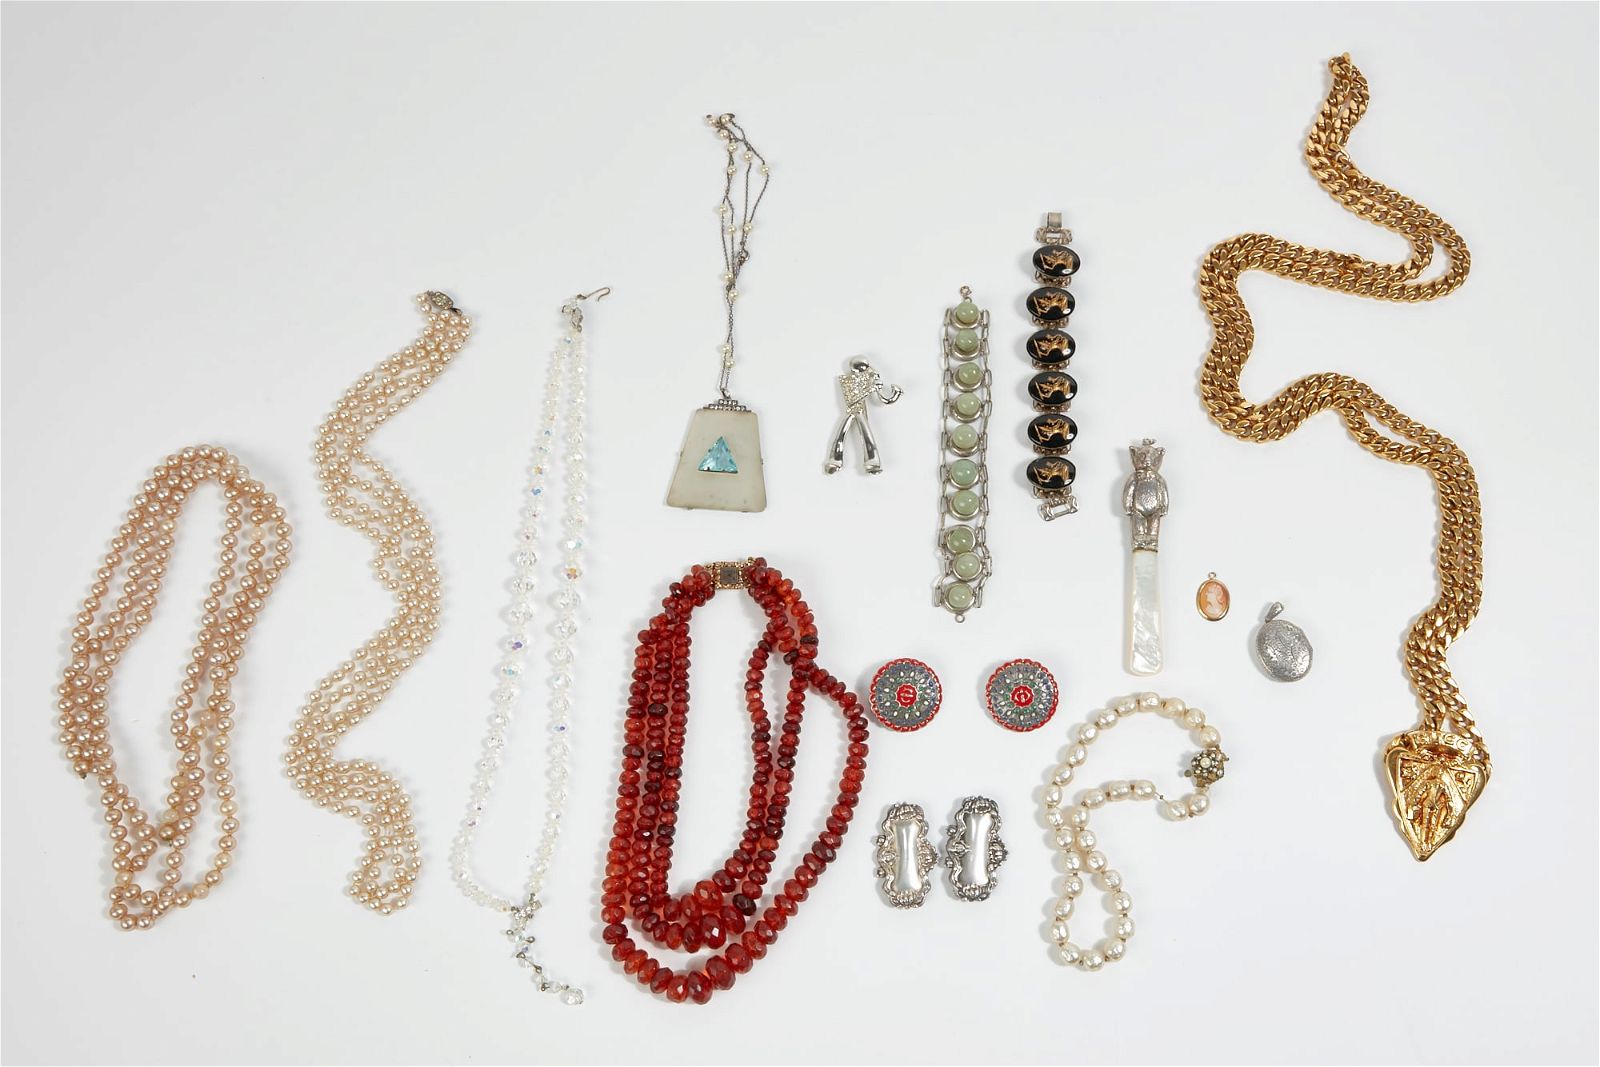 A GROUP OF COSTUME JEWELRY, VARIOUS